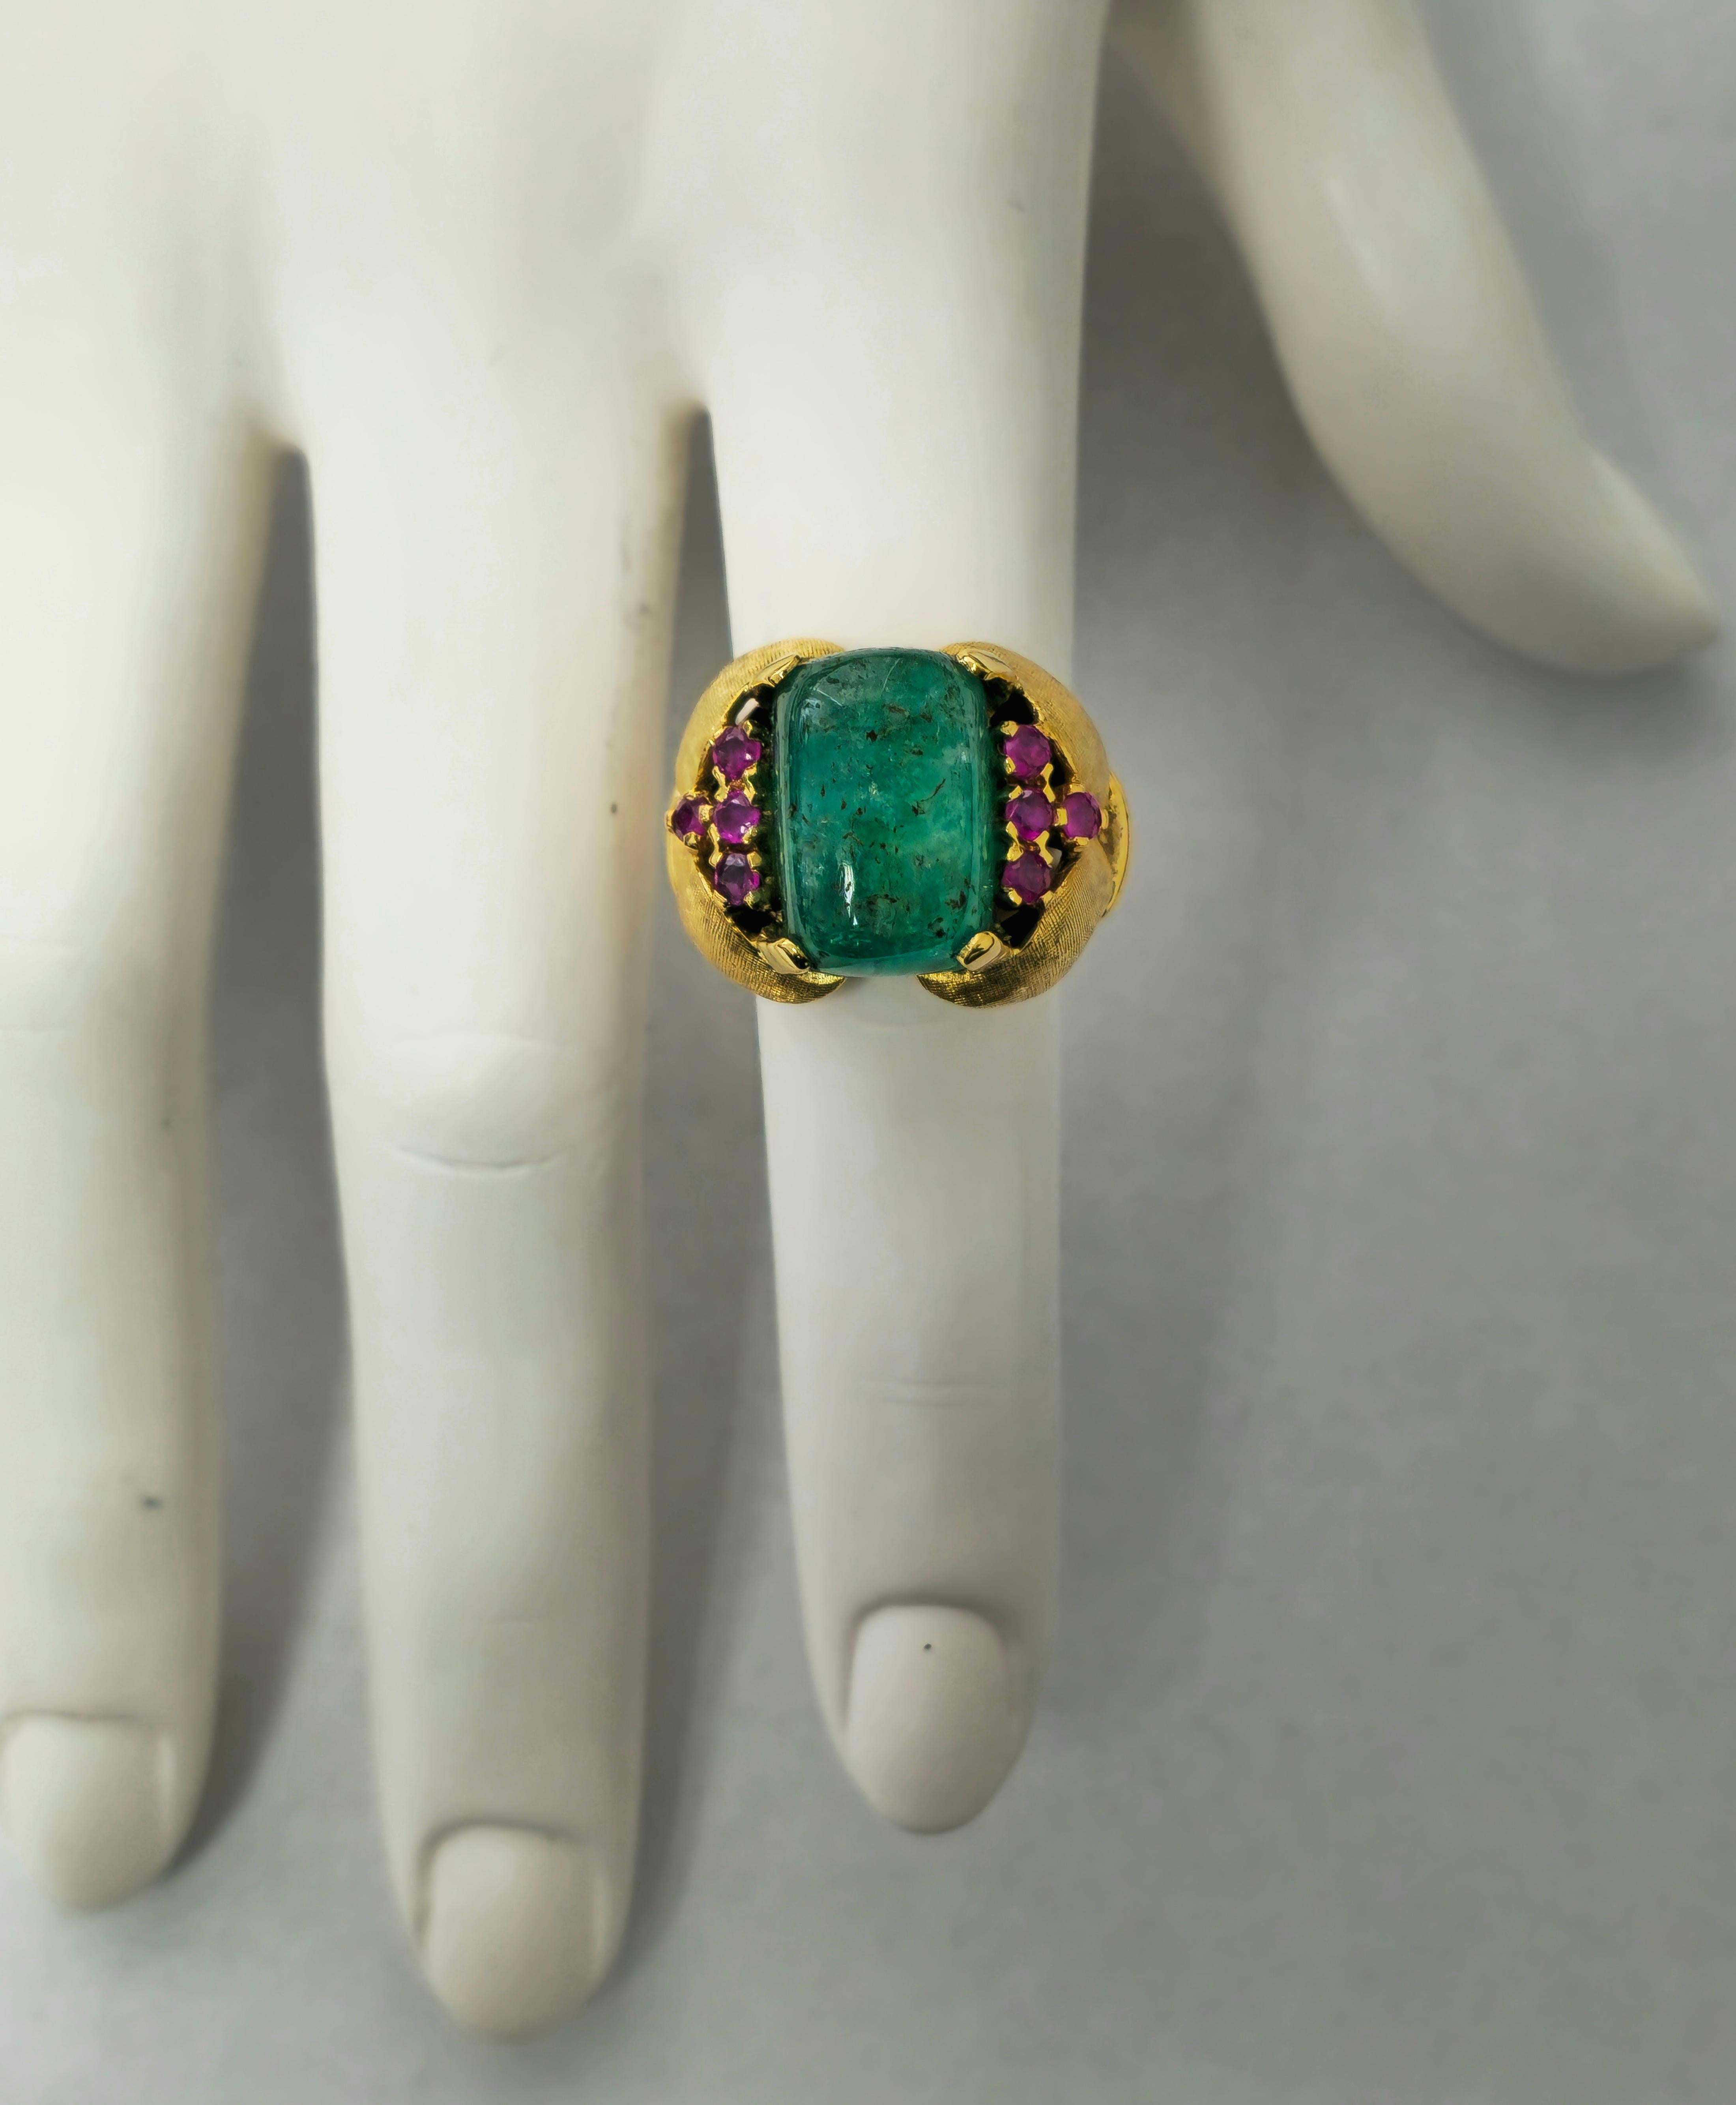 Rare 12.11 Carat Colombian Emerald & Ruby Ring in 14k Gold In Excellent Condition For Sale In Miami, FL